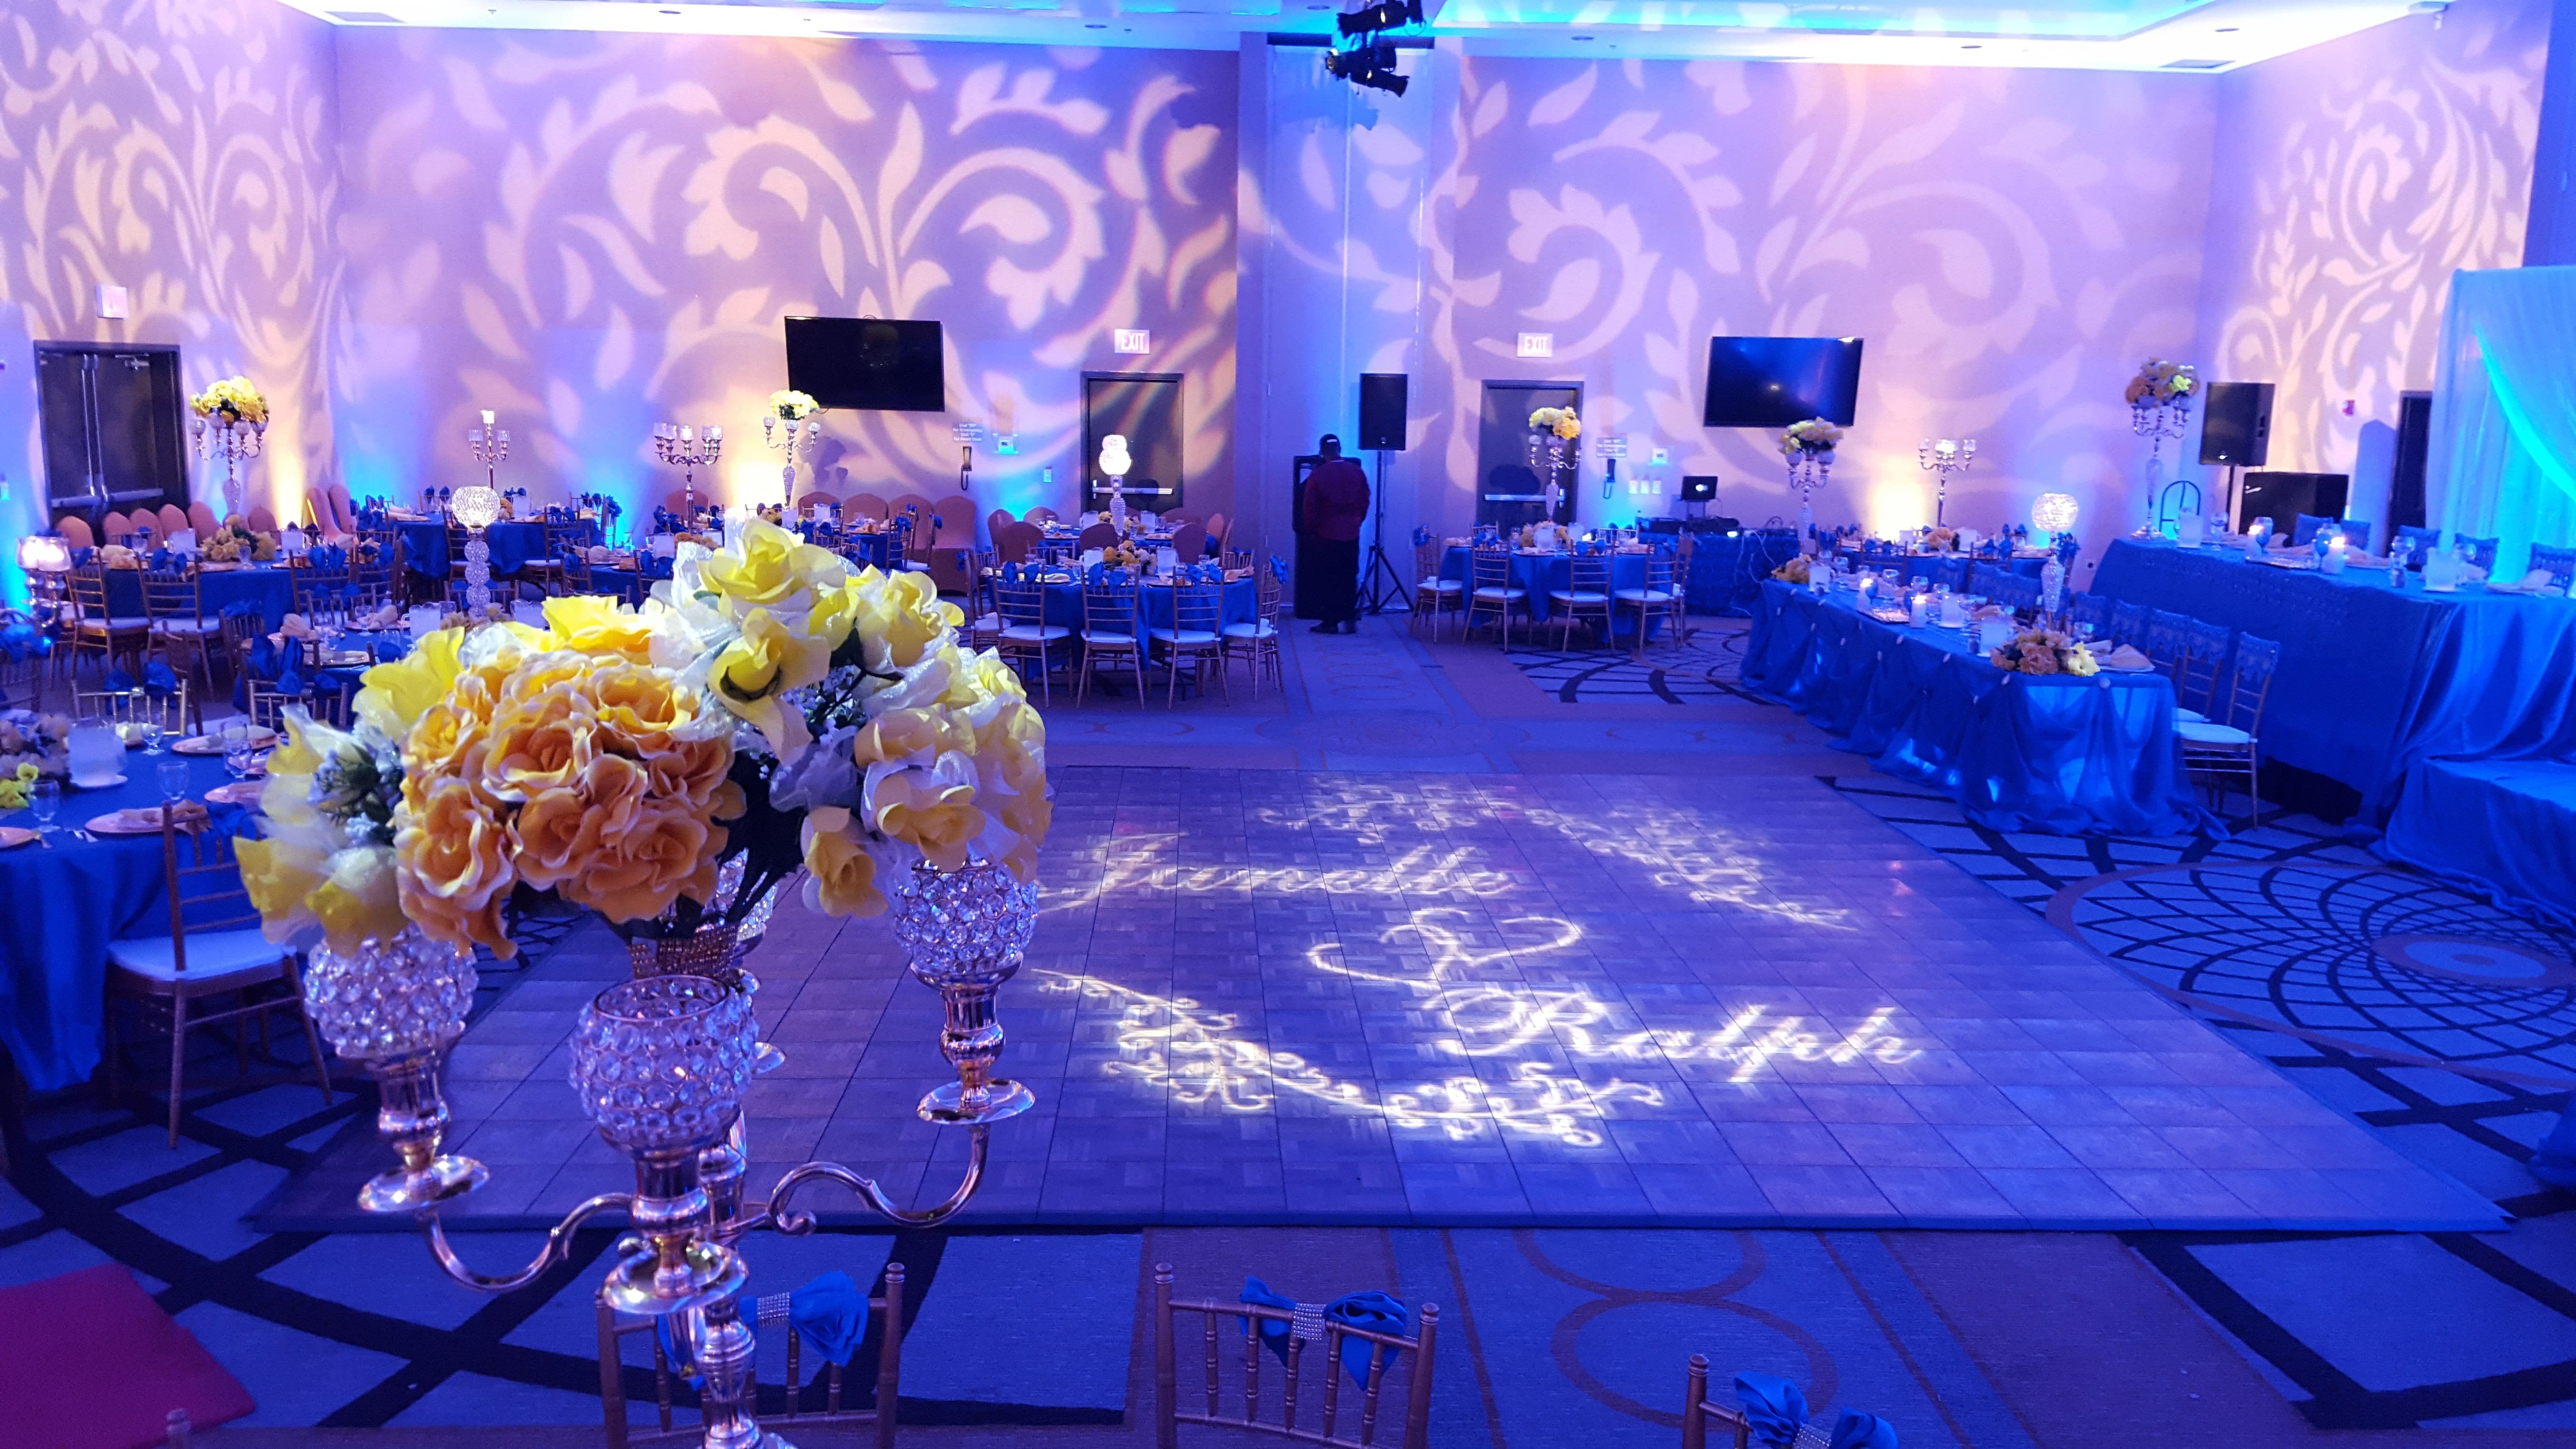 Wedding lighting with a monogram and fancy gobos on the walls. Pin spots.